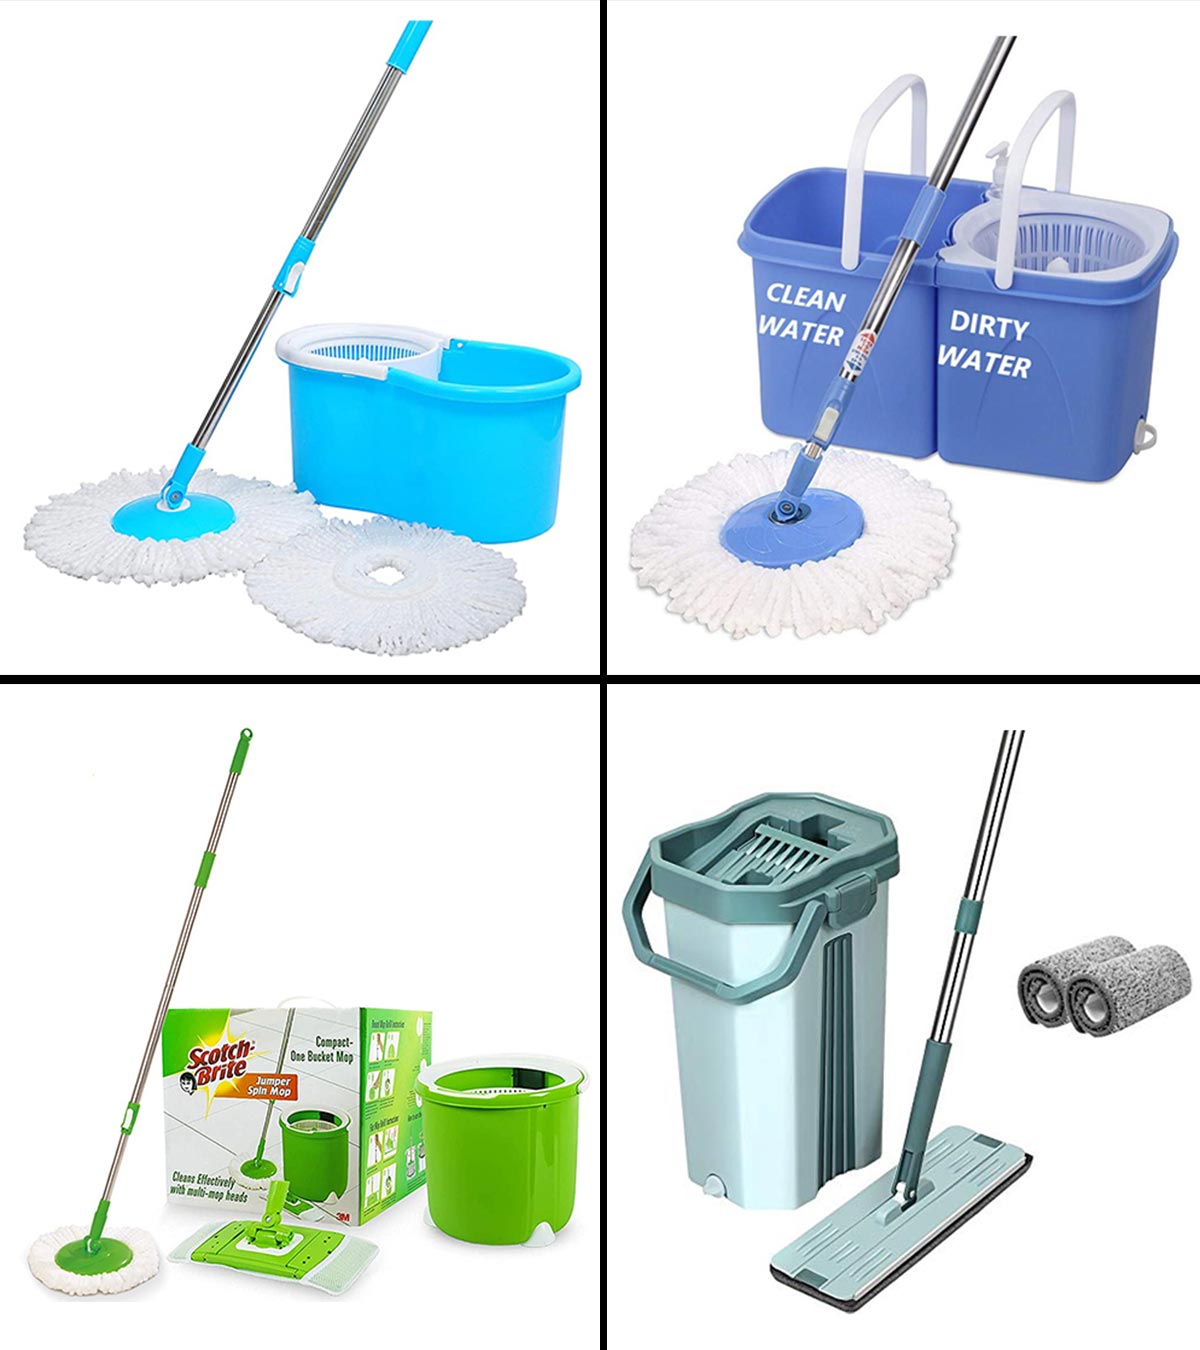 https://www.momjunction.com/wp-content/uploads/2021/06/13-Best-Spin-Mops-In-India-Available-In-2021-Banner-MJ.jpg